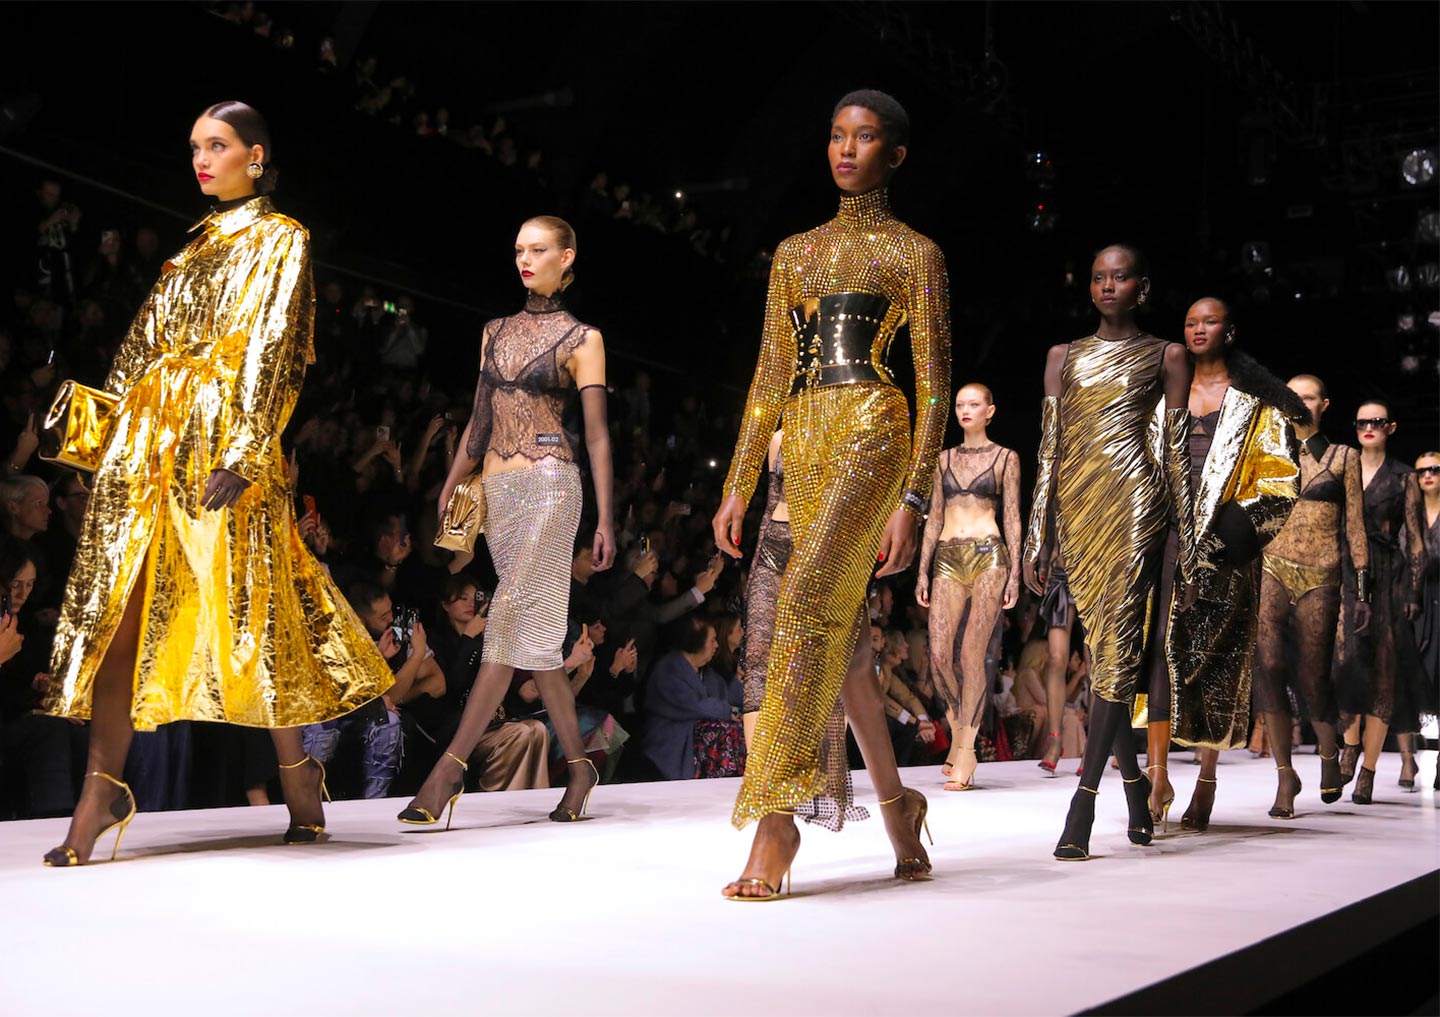 Finale at the FW23 Dolce&Gabbana show by Domenico Dolce and Stefano Gabbana